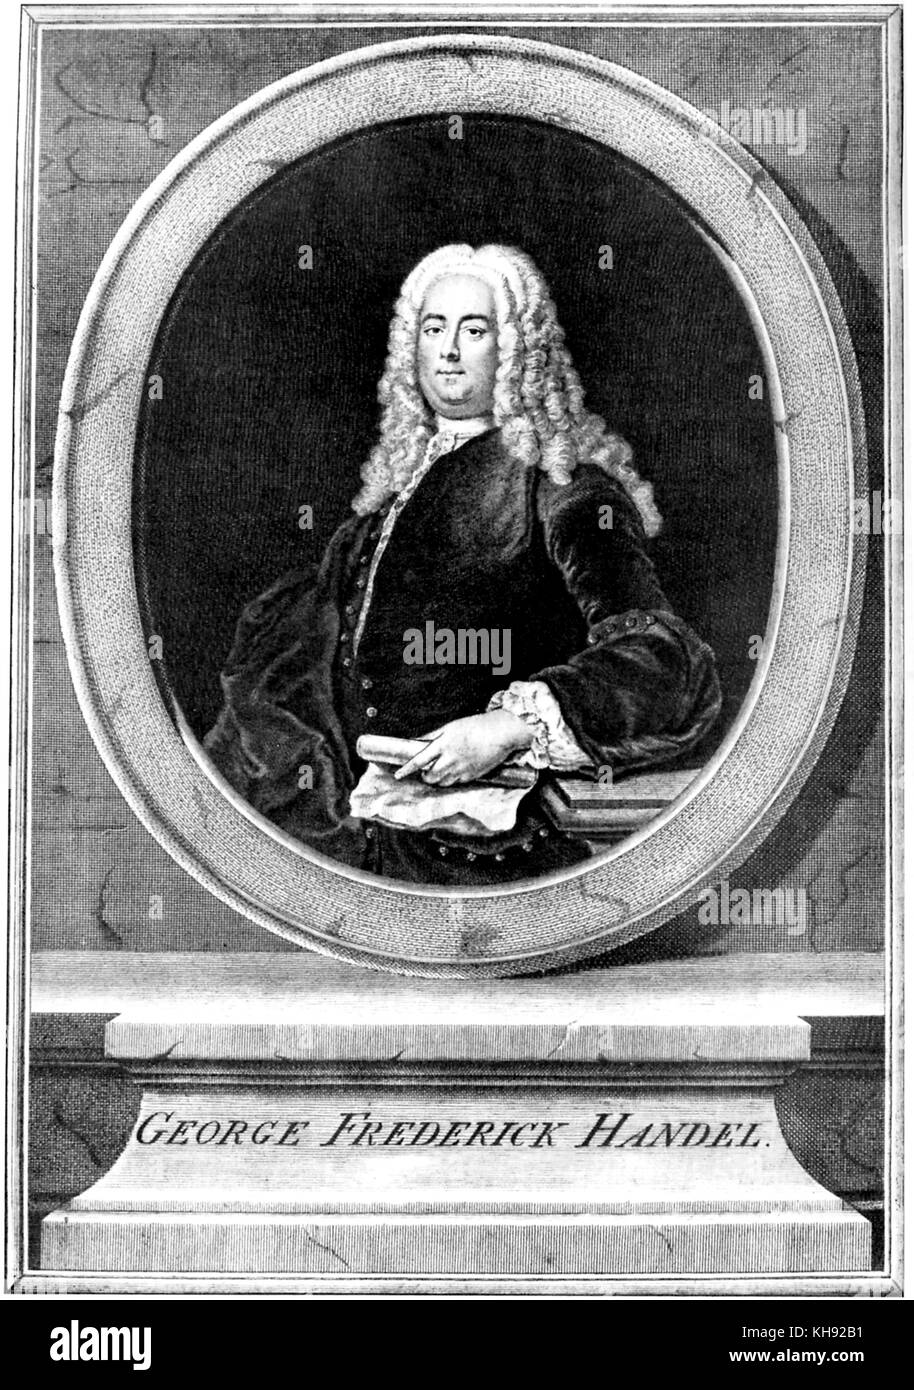 George Frederic Handel. Portrait by unknown artist.  German-English composer, 23 February 1685 - 14 April 1759. Stock Photo